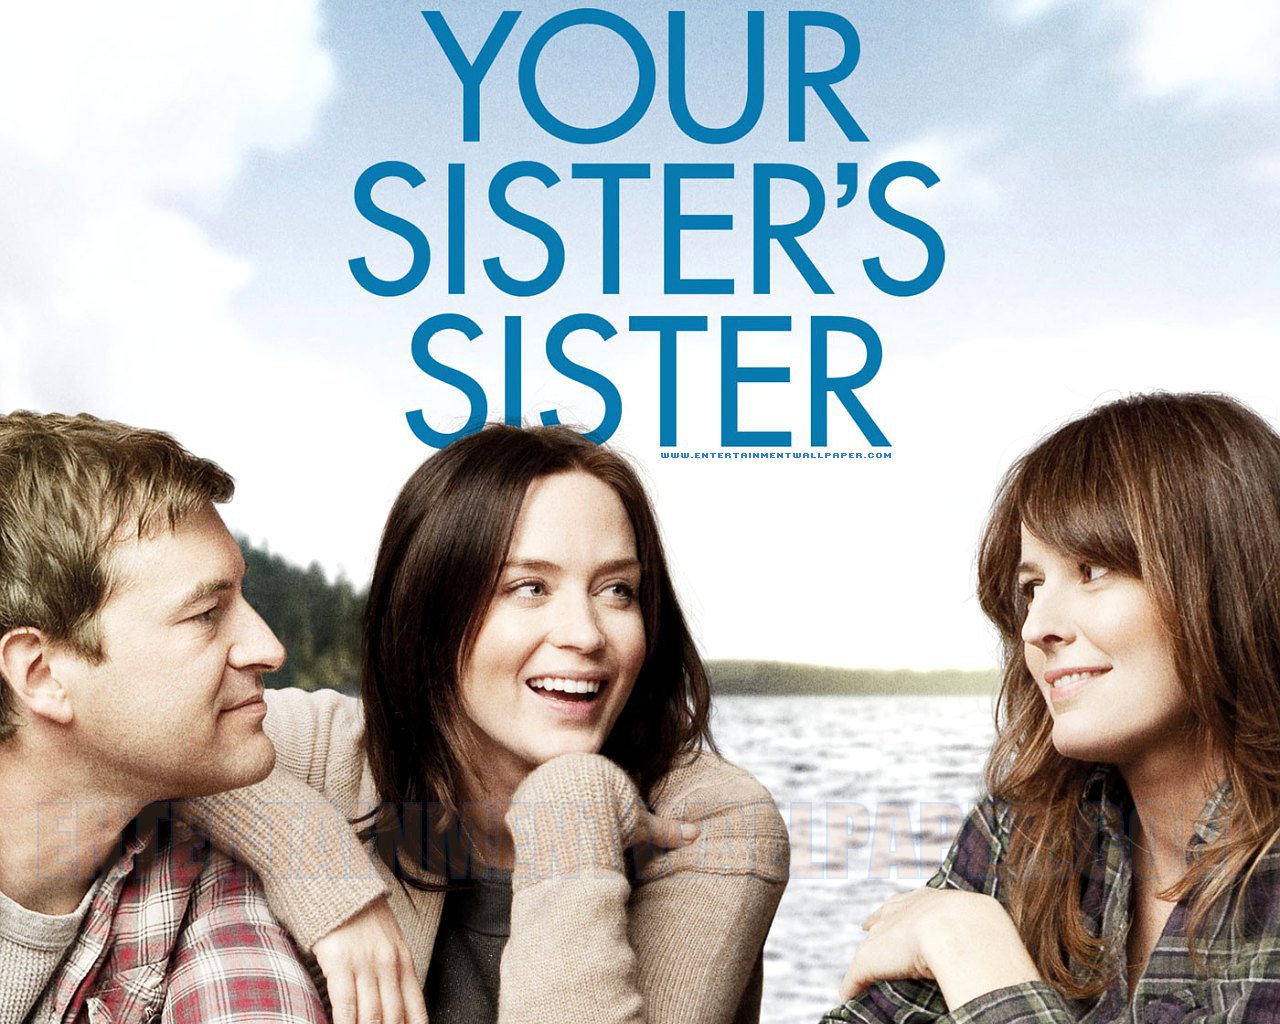 Lynn Shelton's "Your Sister's Sister" is nominated for a GLAAD Media Award.